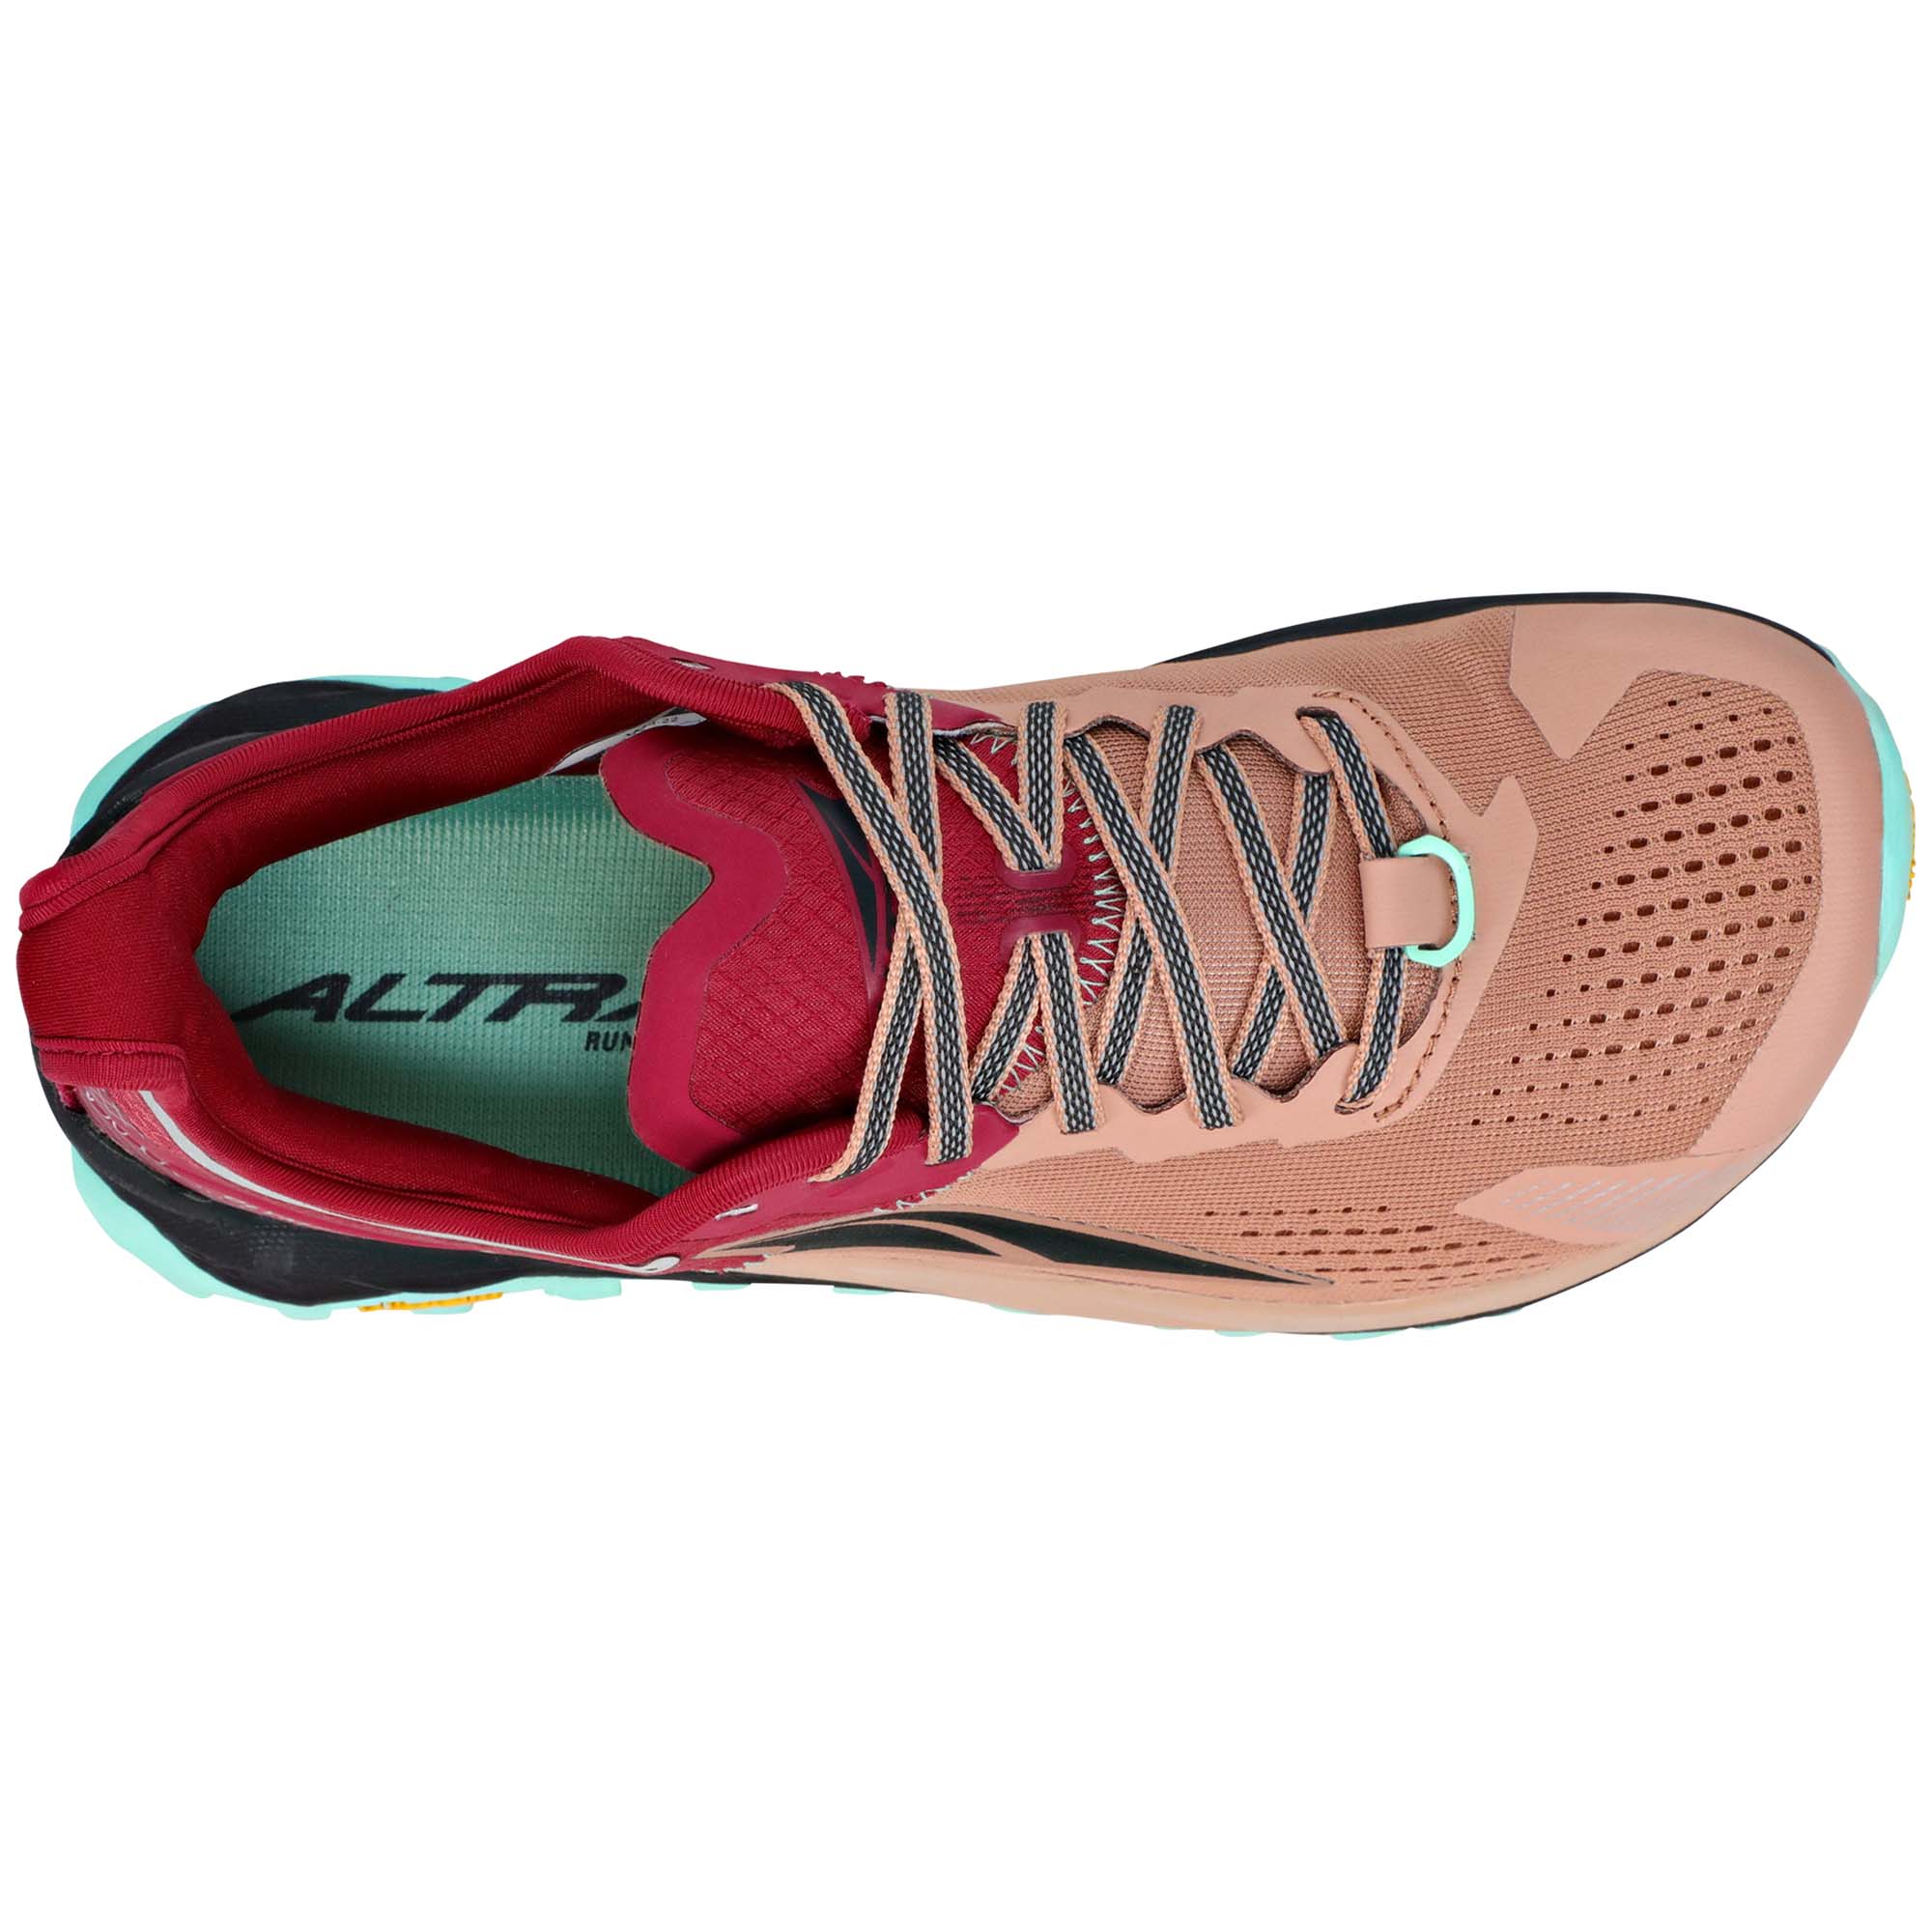 Altra Olympus 5 Women's Off-Road Running Shoes